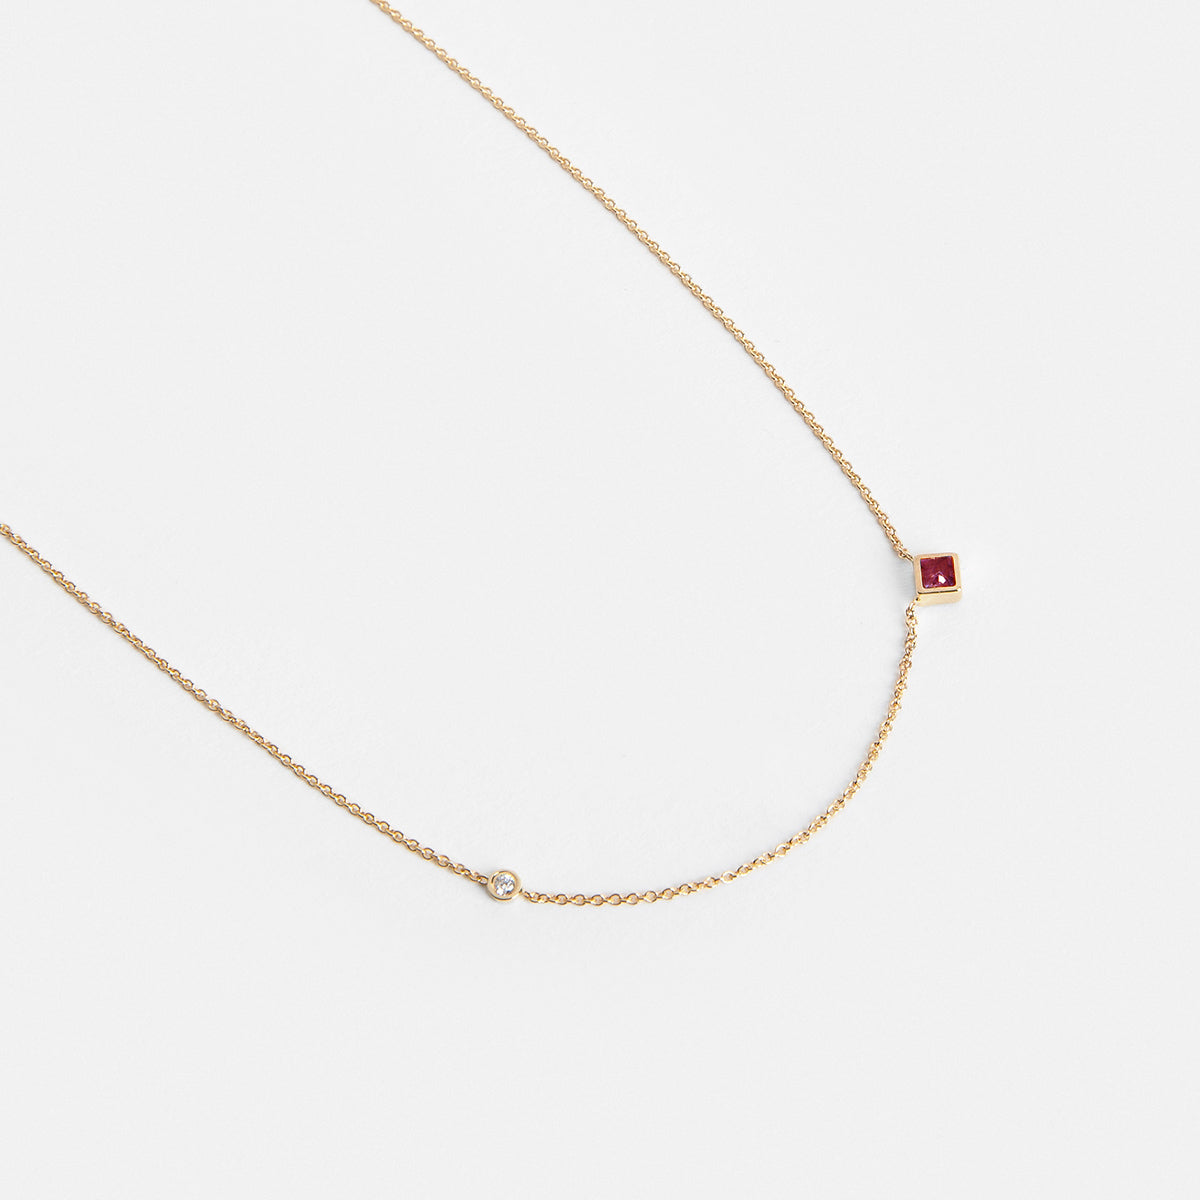 Isu Handmade Necklace in 14k Gold set with Ruby and White Diamond By SHW Fine Jewelry NYC